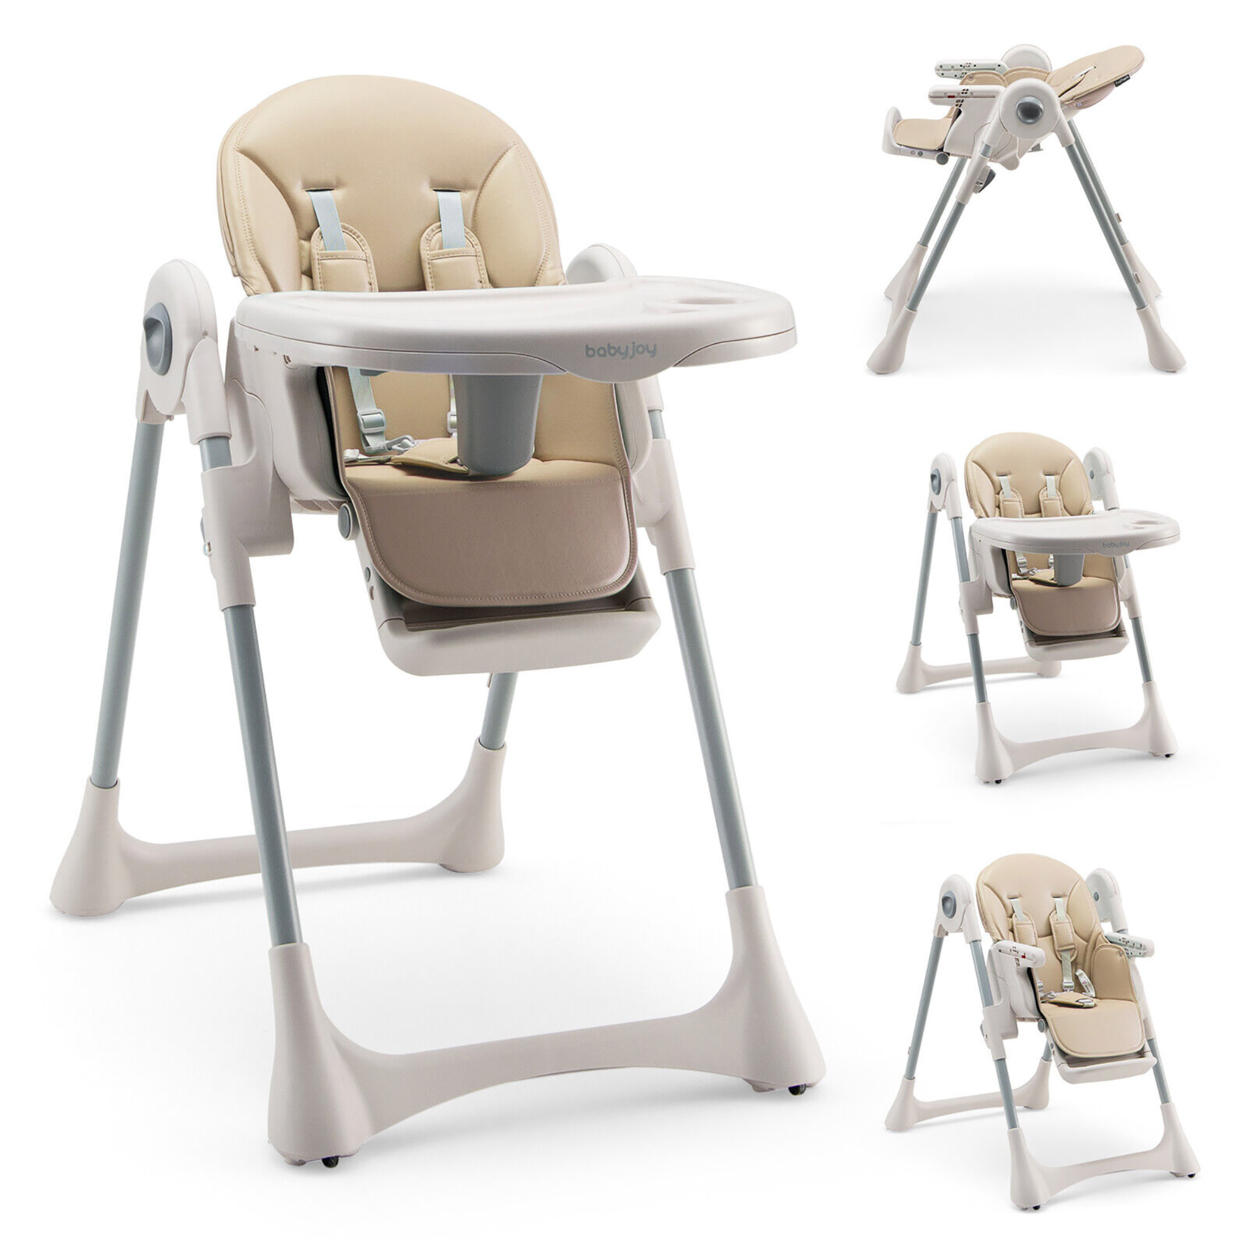 Baby High Chair Folding Baby Dining Chair W/ Adjustable Height & Footrest - Beige